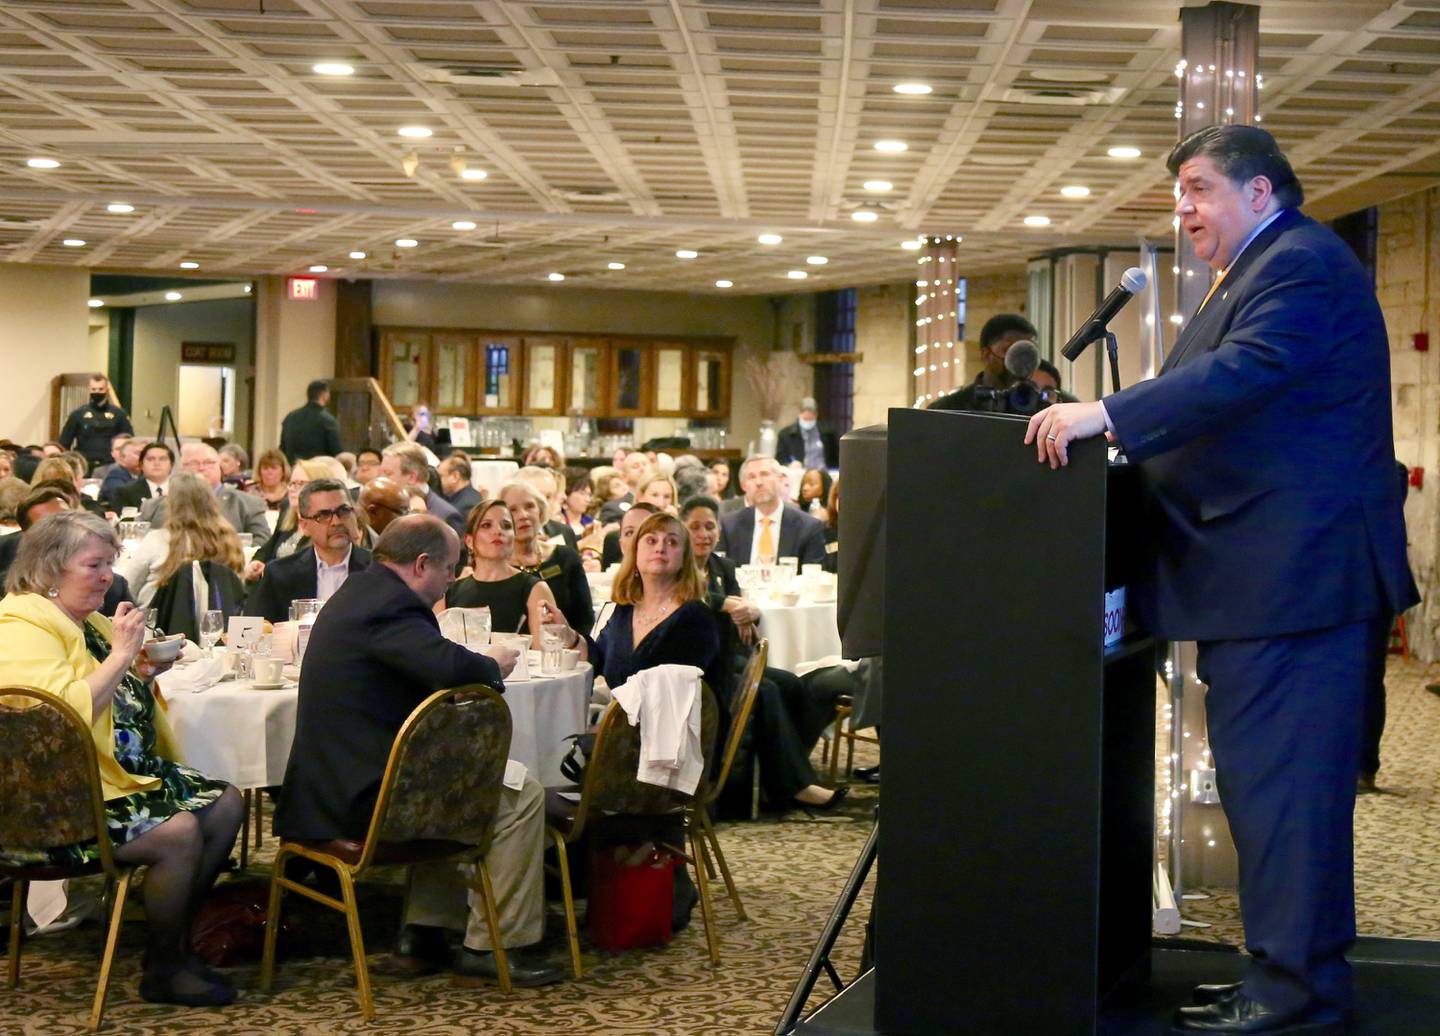 Governor JB Pritzker speaks to a full house at Two Brothers Roundhouse in Aurora for the Kane County Democrats’ Truman Dinner on Sunday, Feb. 27, 2022.